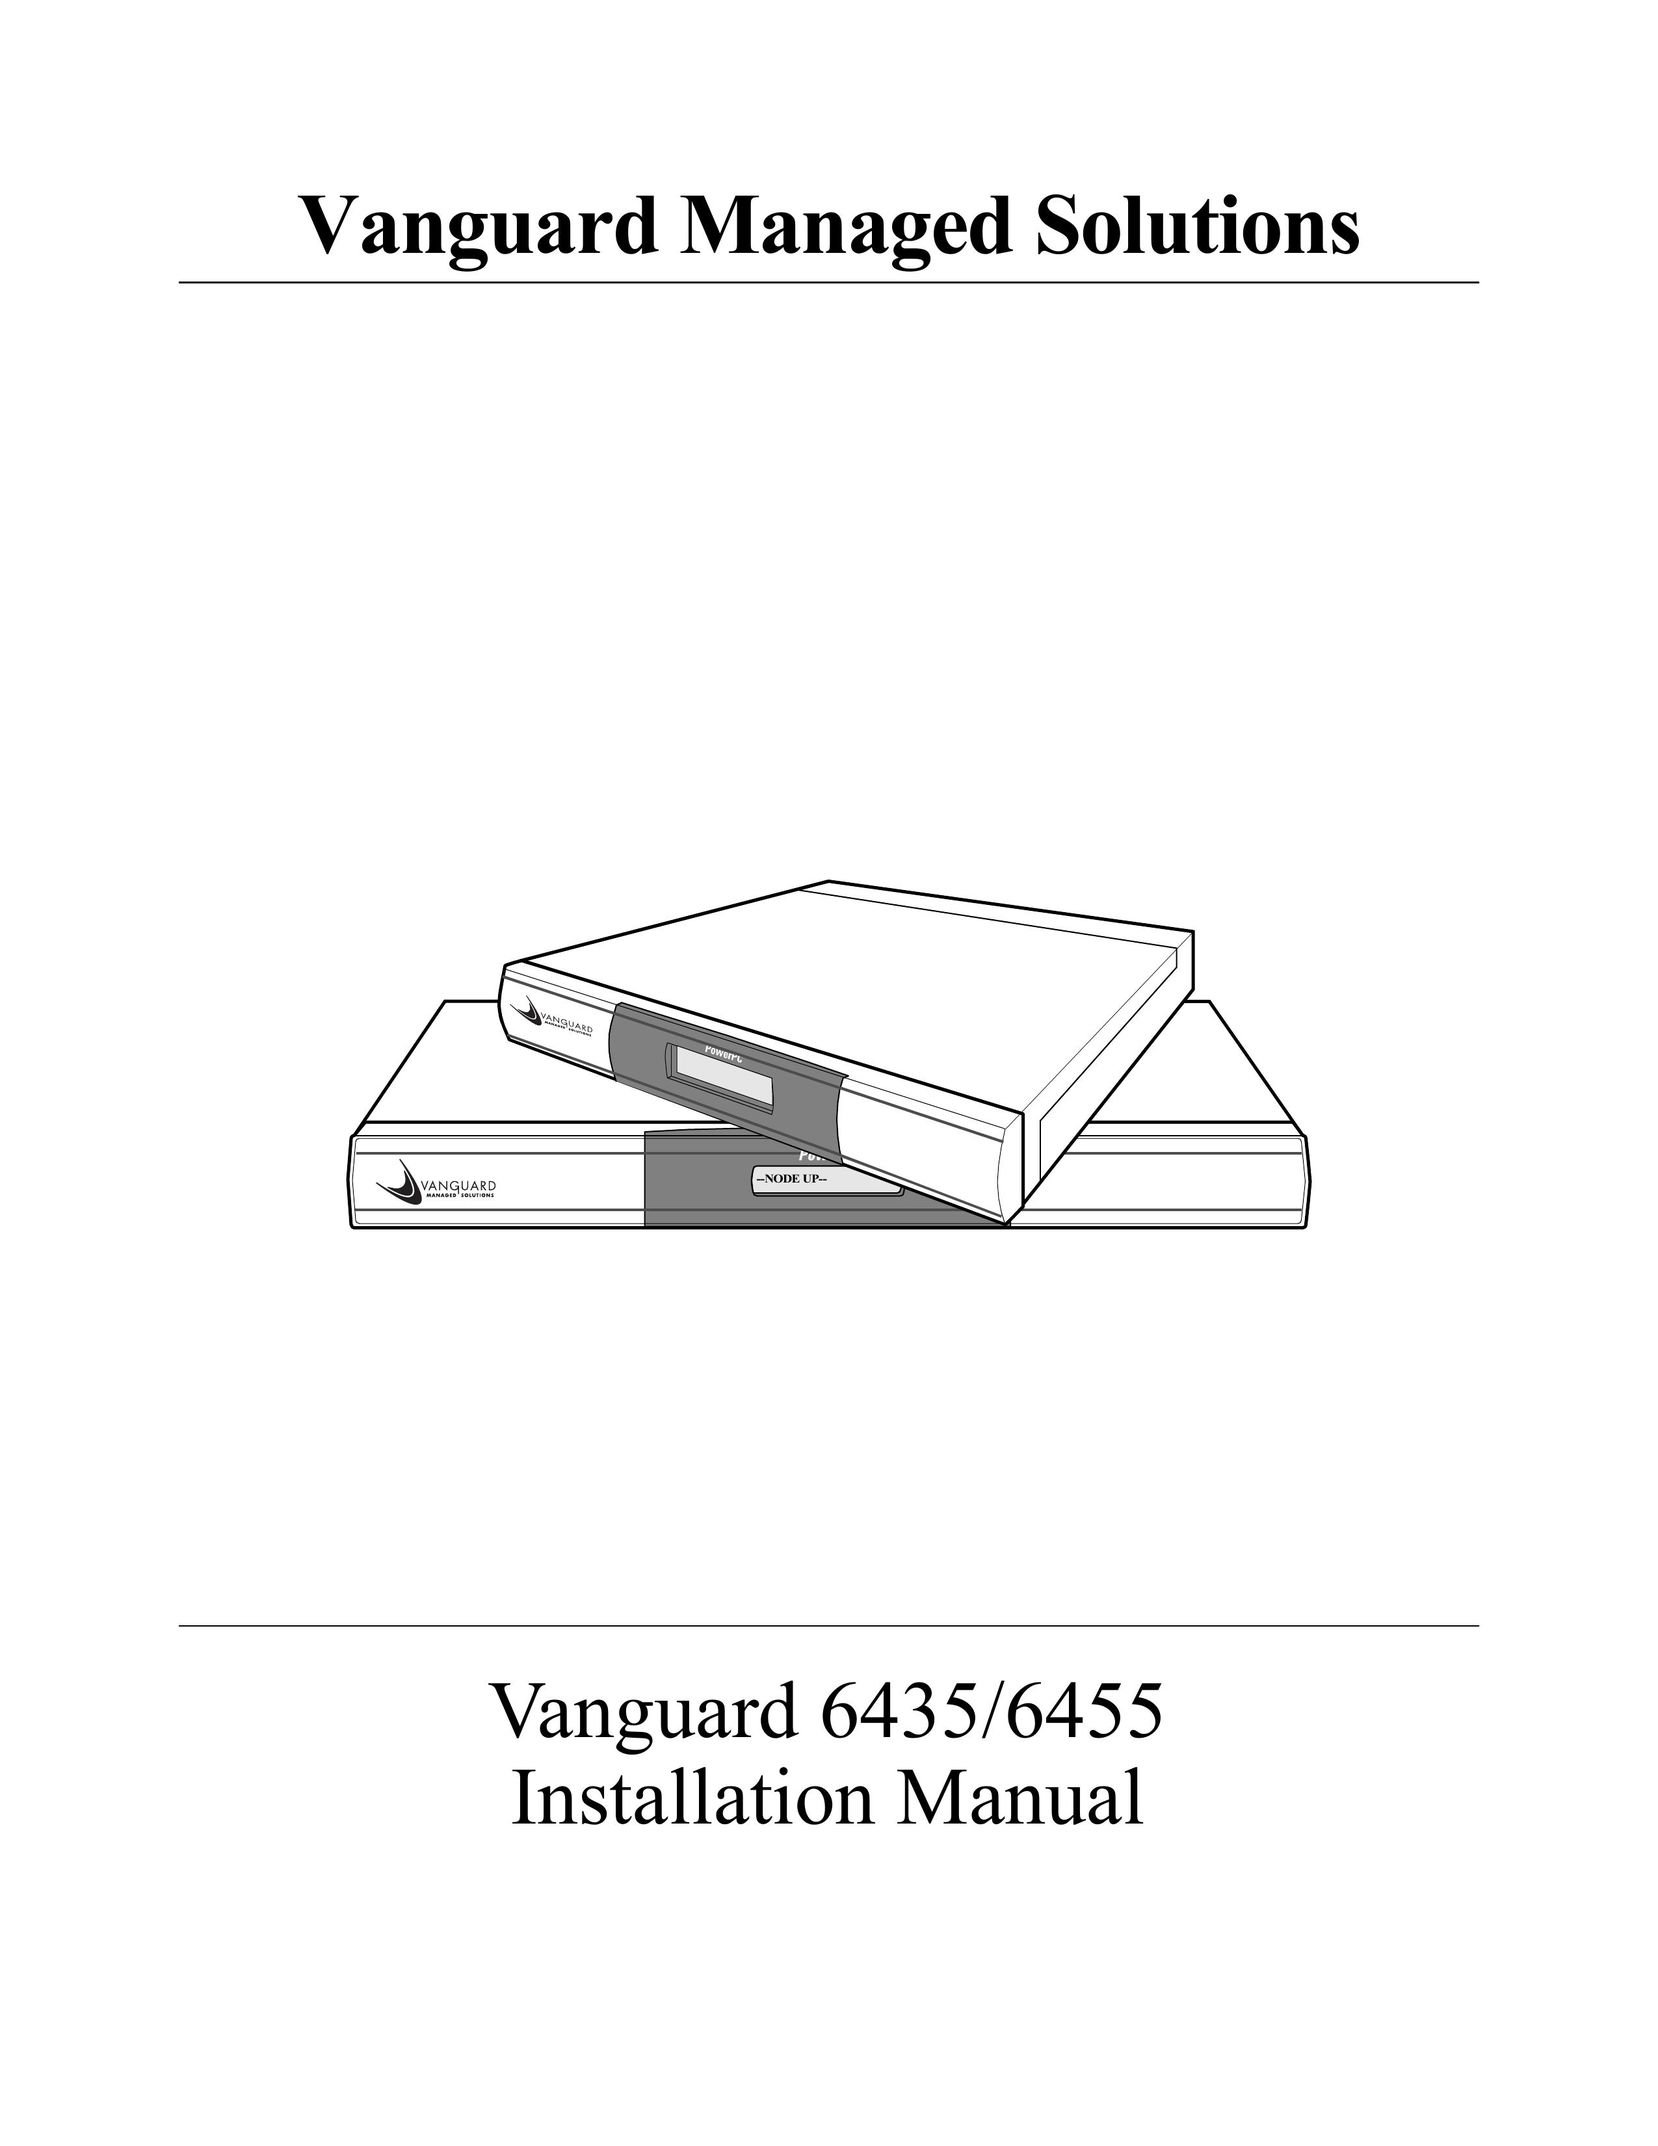 Vanguard Managed Solutions 6435 Network Card User Manual